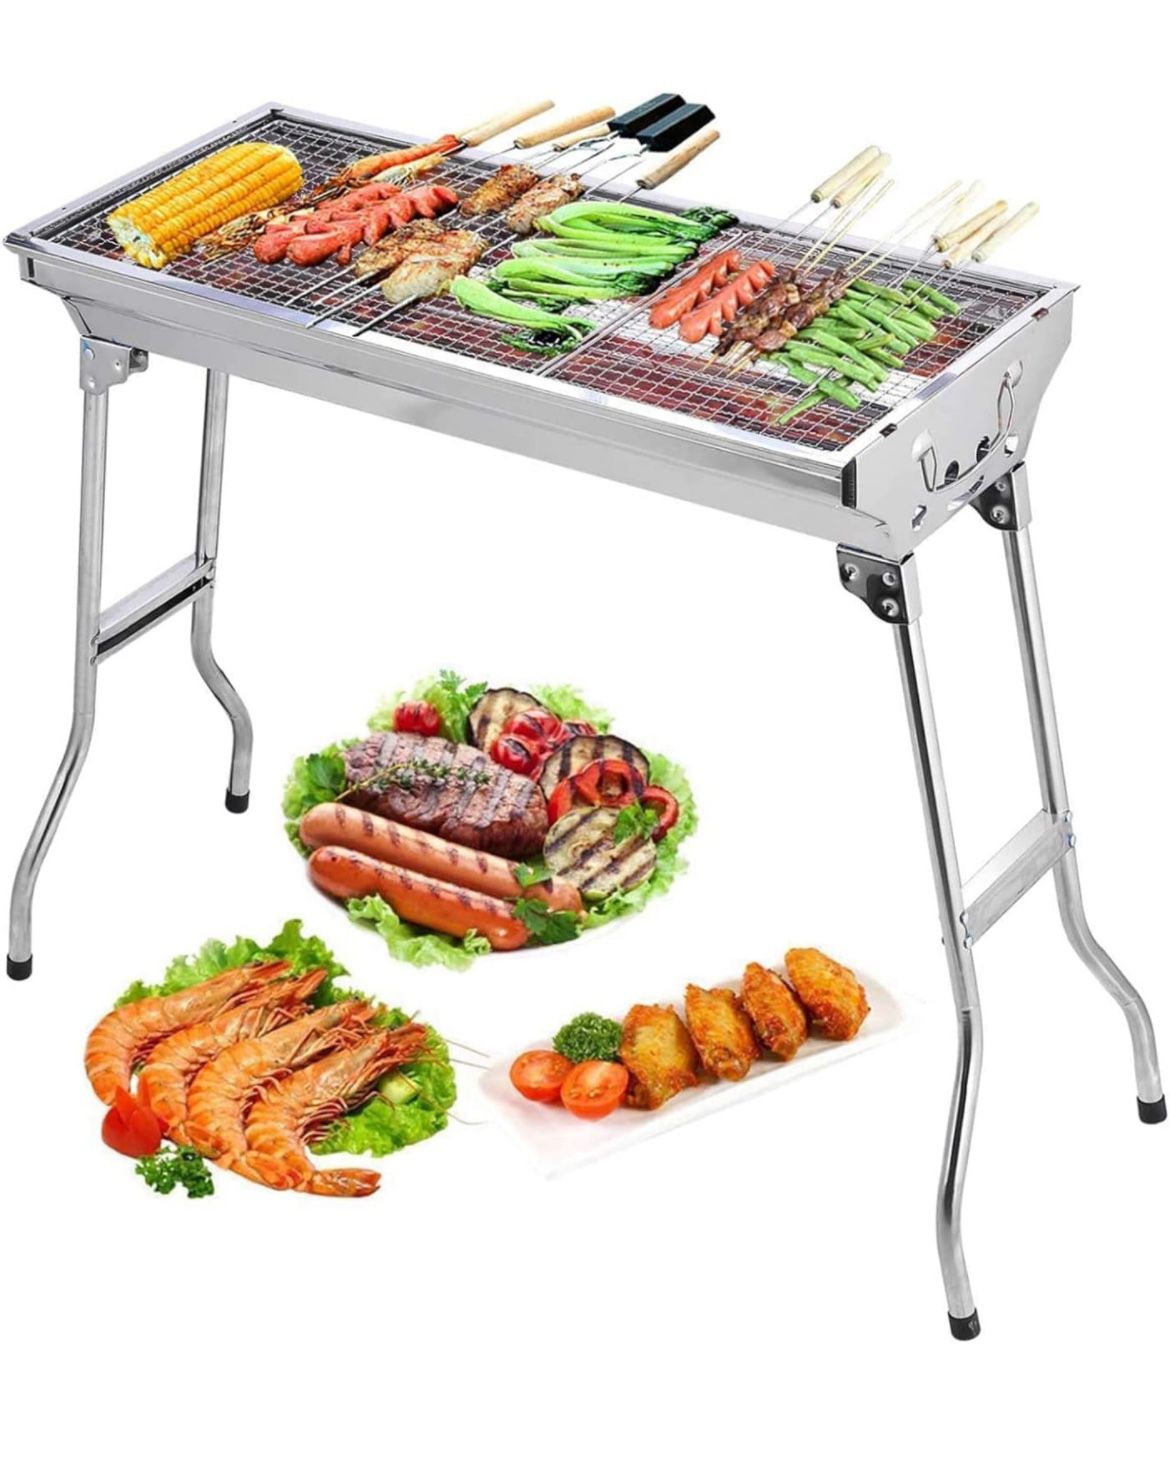 Barbecue Charcoal Grill Stainless Steel Folding Portable BBQ Tool Kits for Outdoor Cooking Camping Hiking Picnics Tailgating Backpacking or Any Outdoo